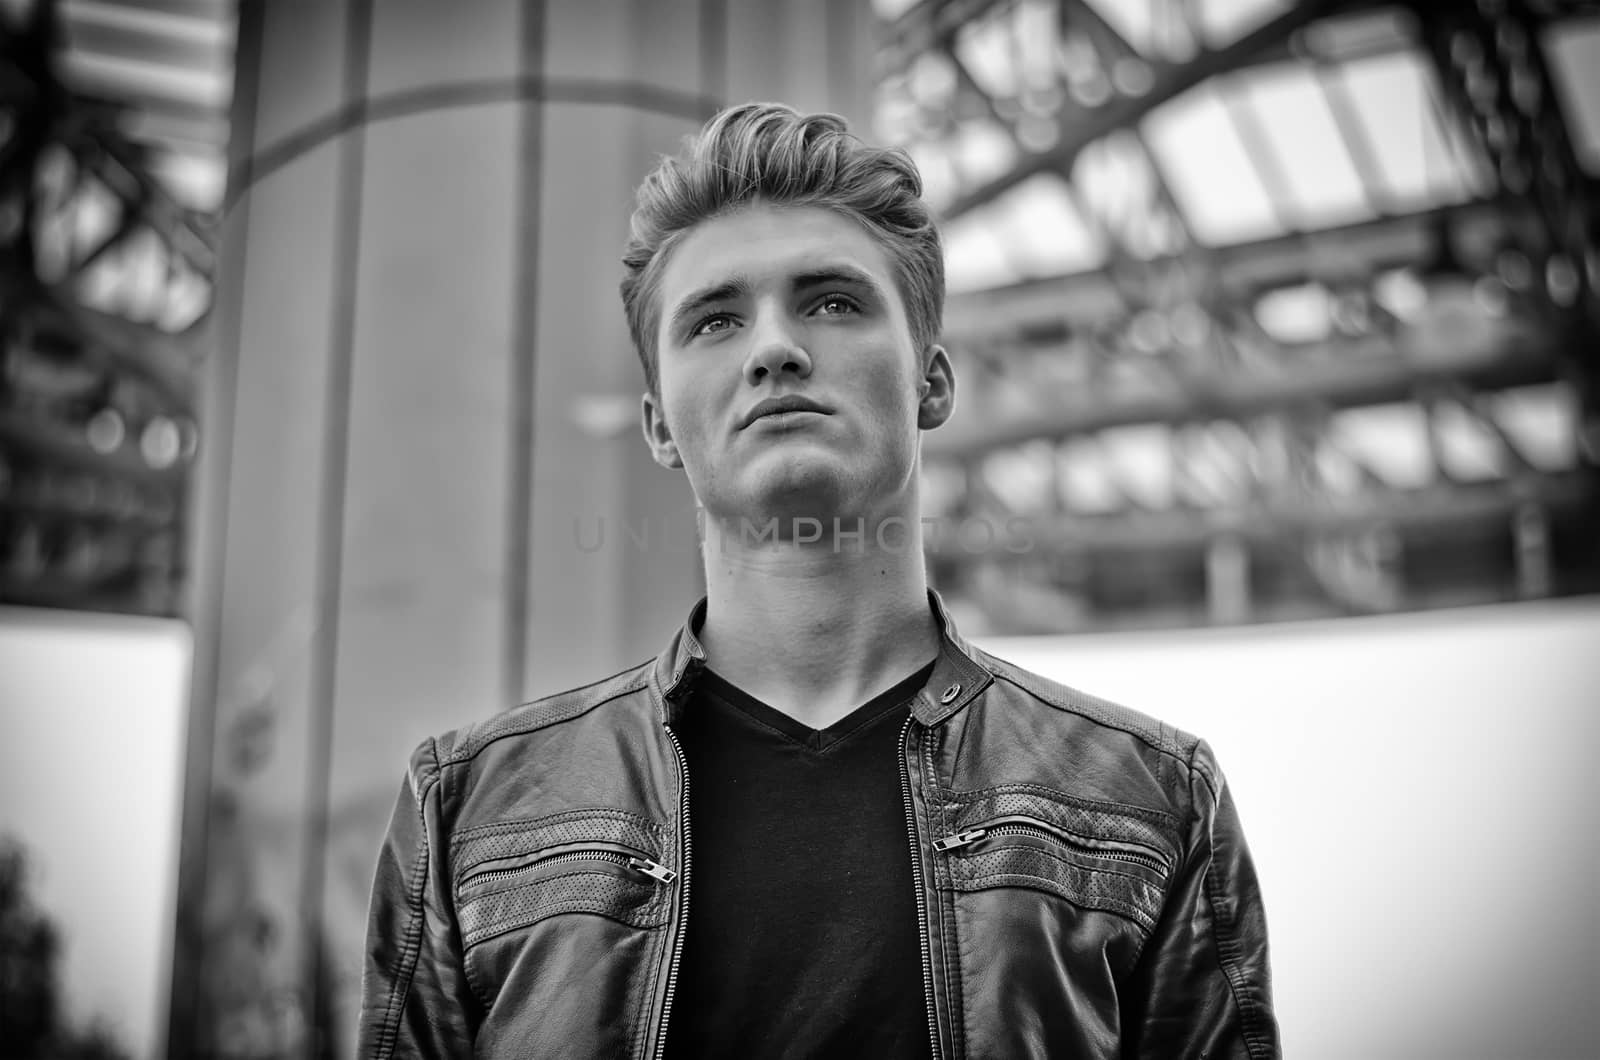 Attractive blond young man in city environment, black and white shot